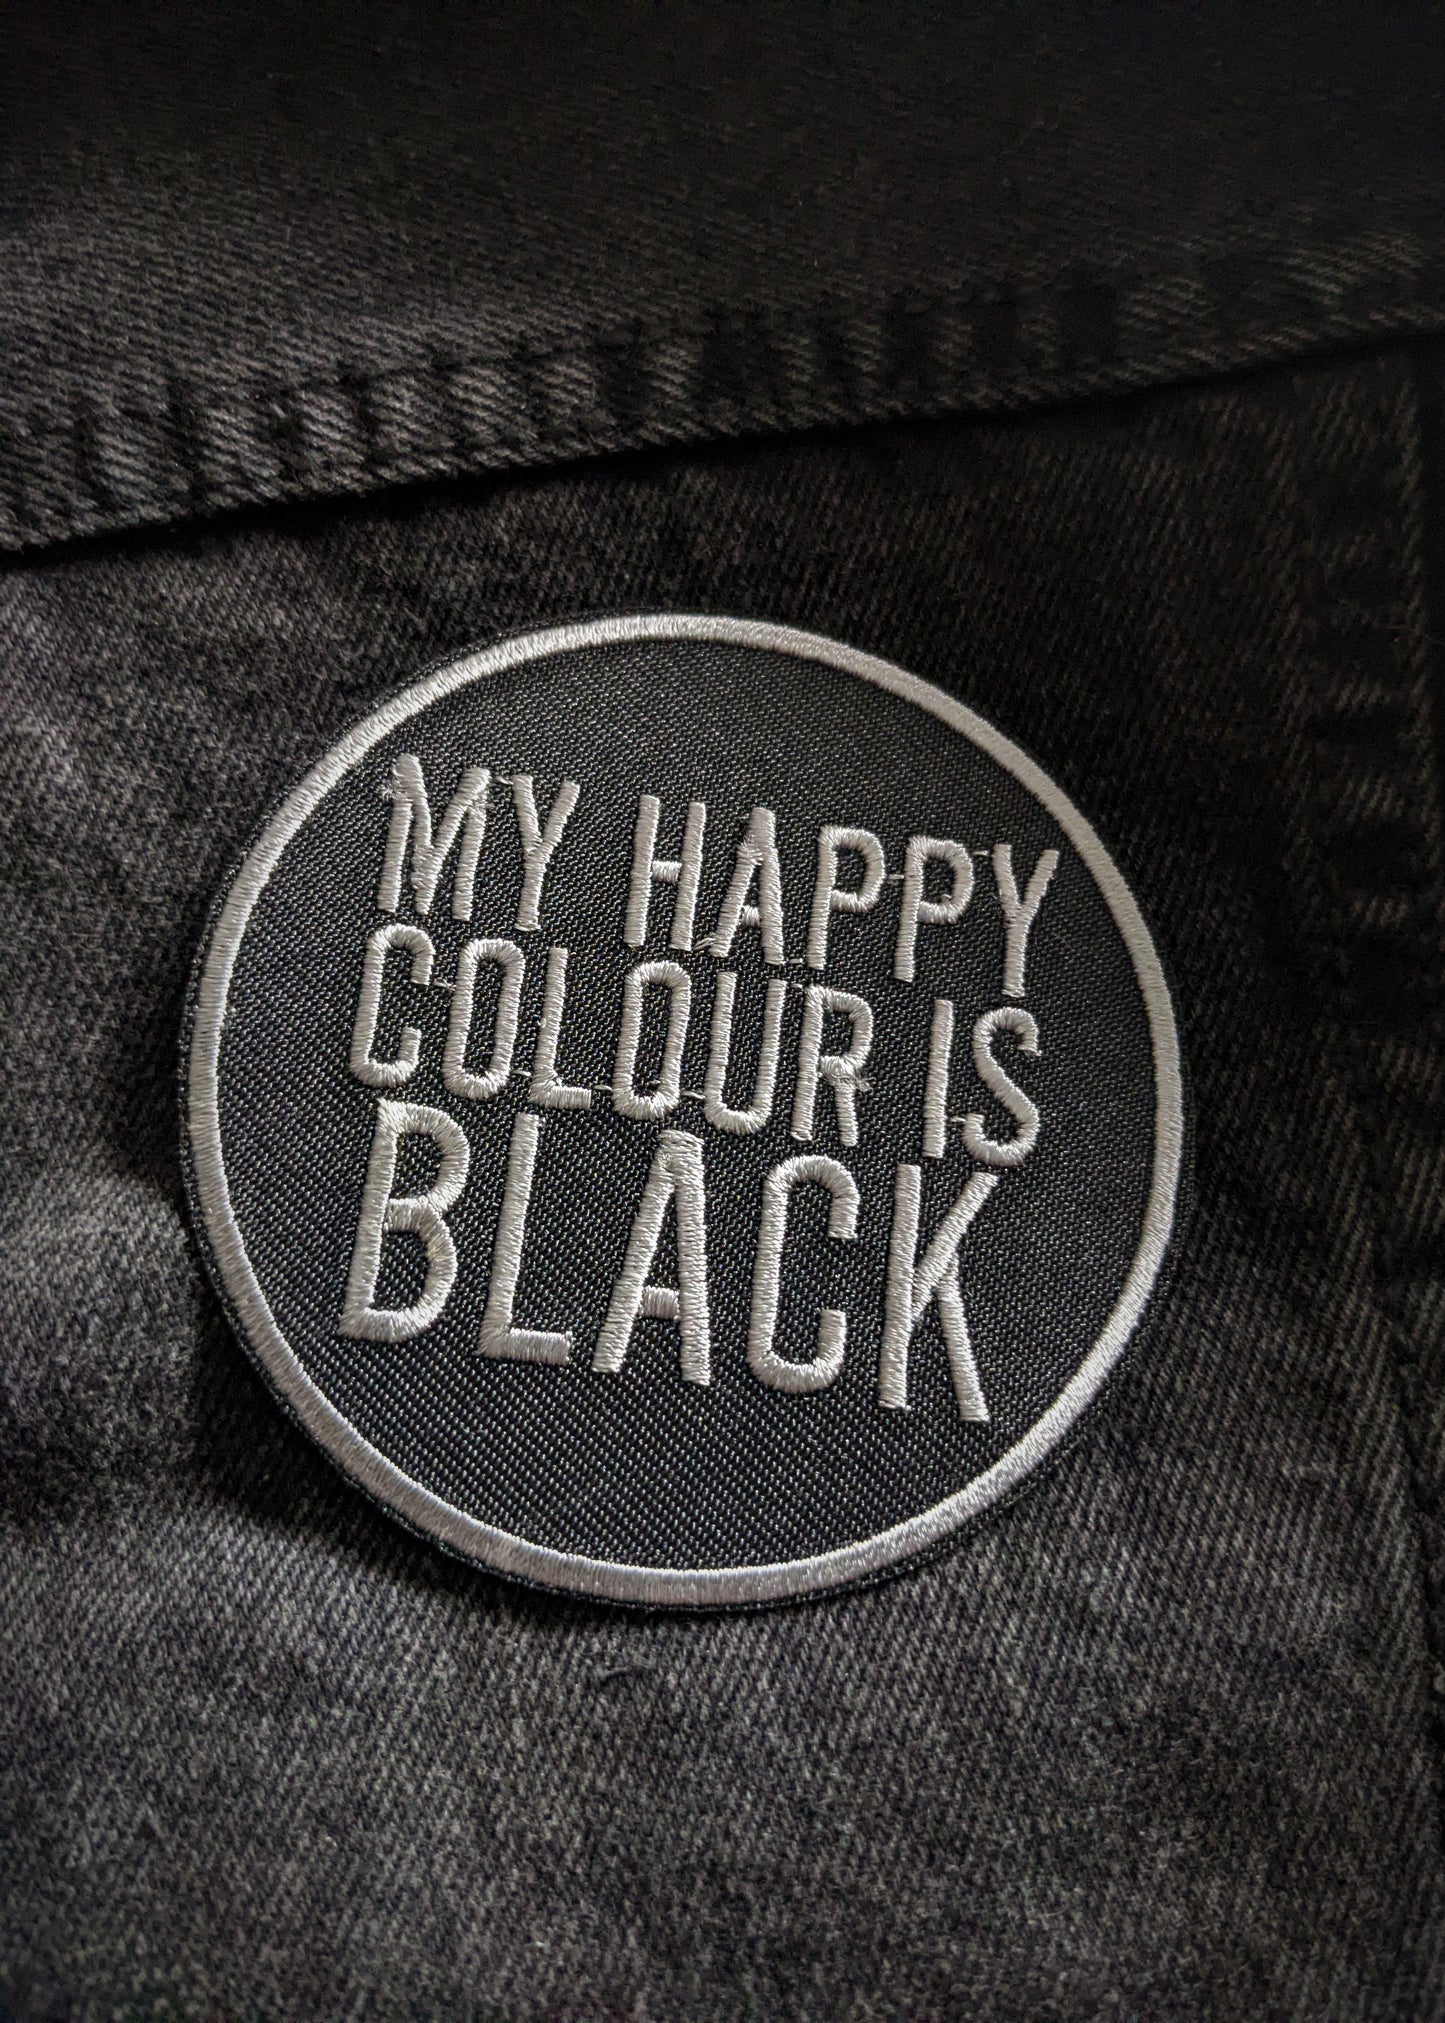 My Happy Colour is Black Patch